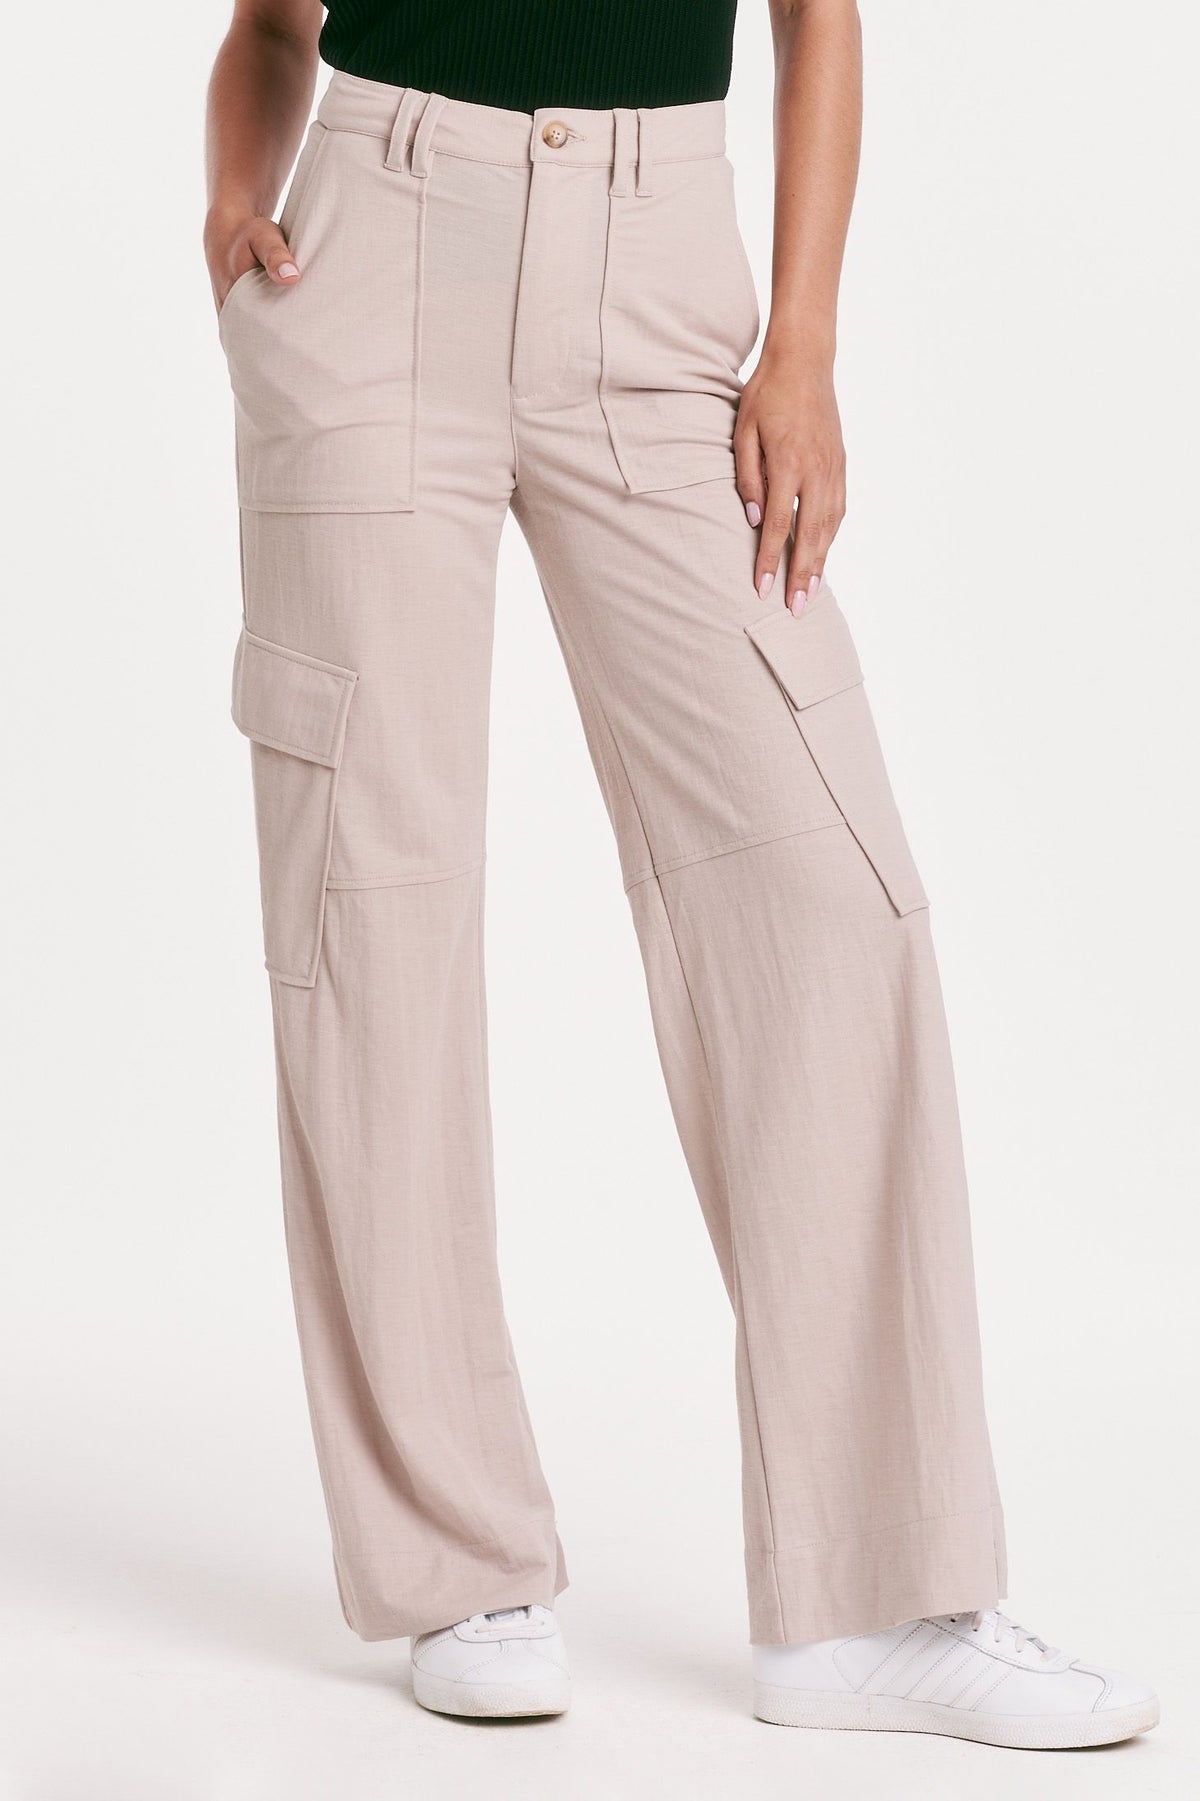 Another Love Cairo Moonstone Pant Pants - The Attic Boutique